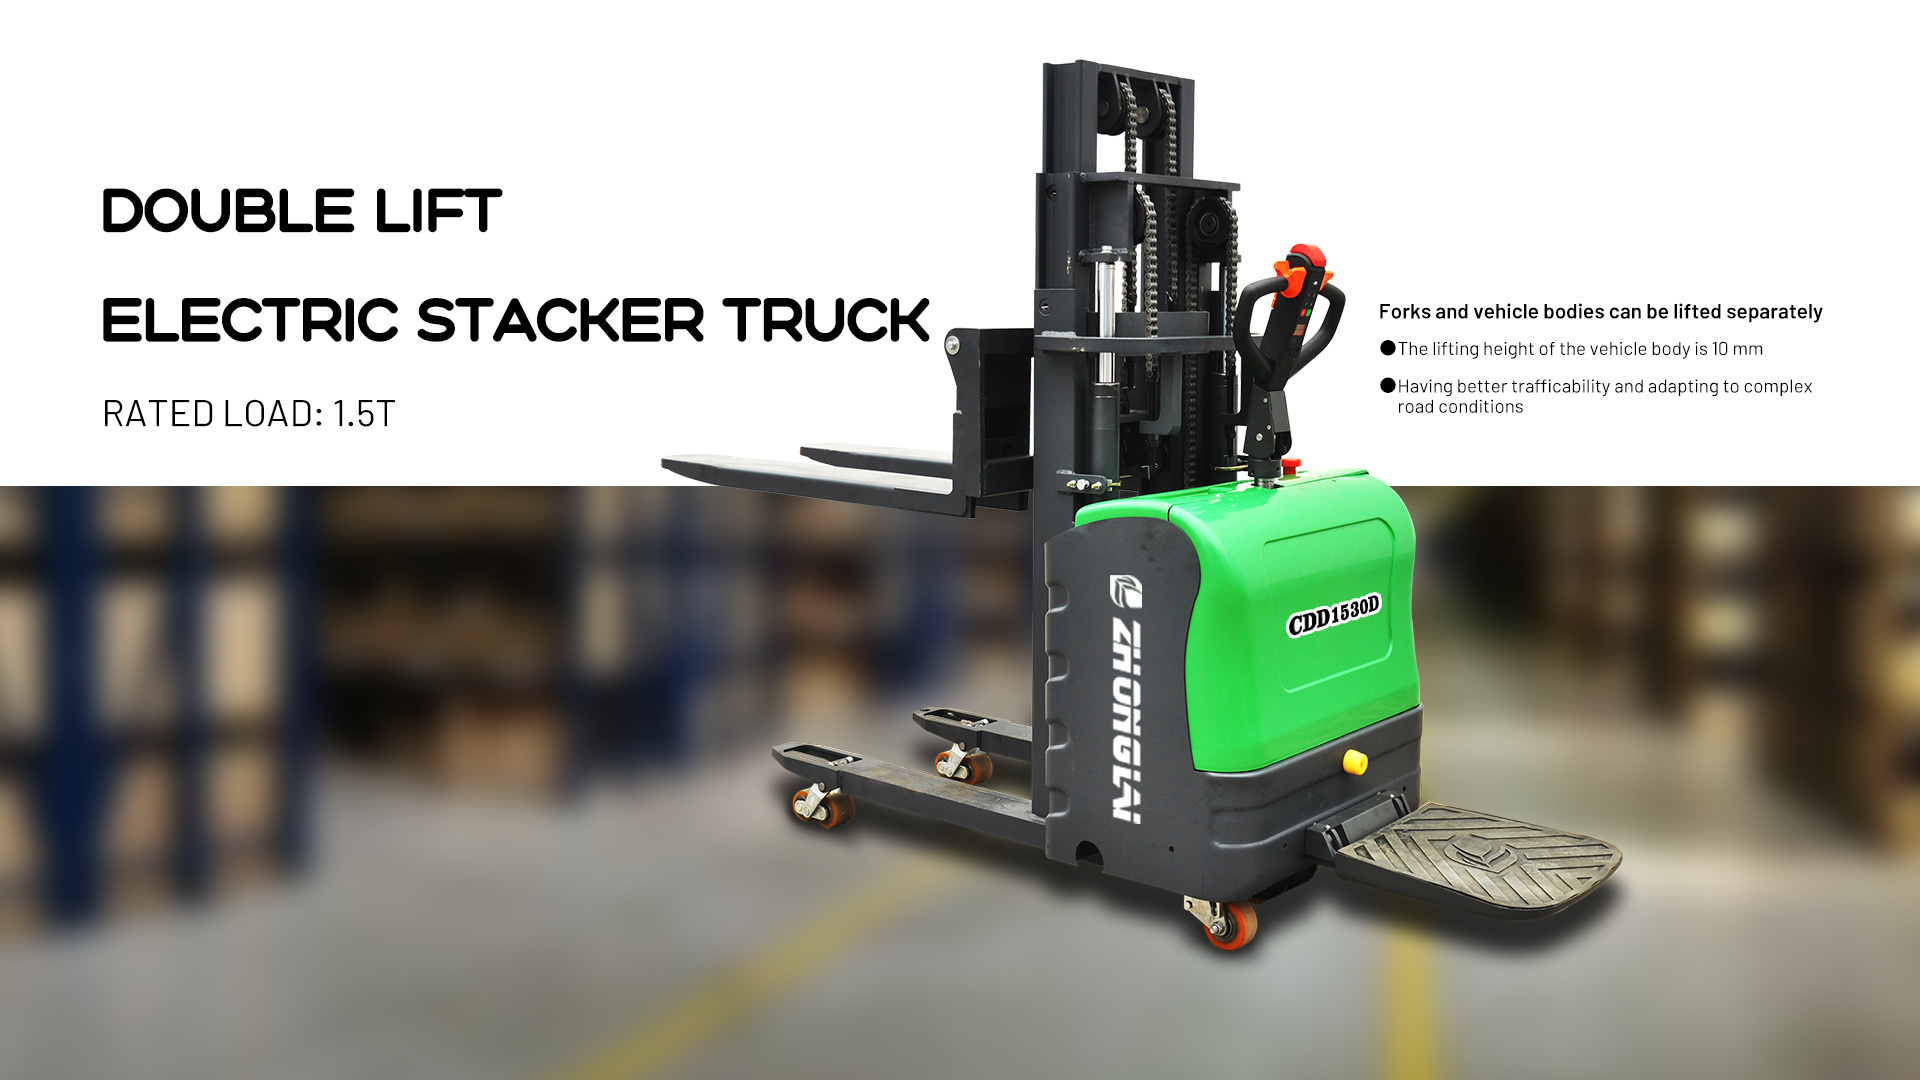 Double lifting electric stacker truck